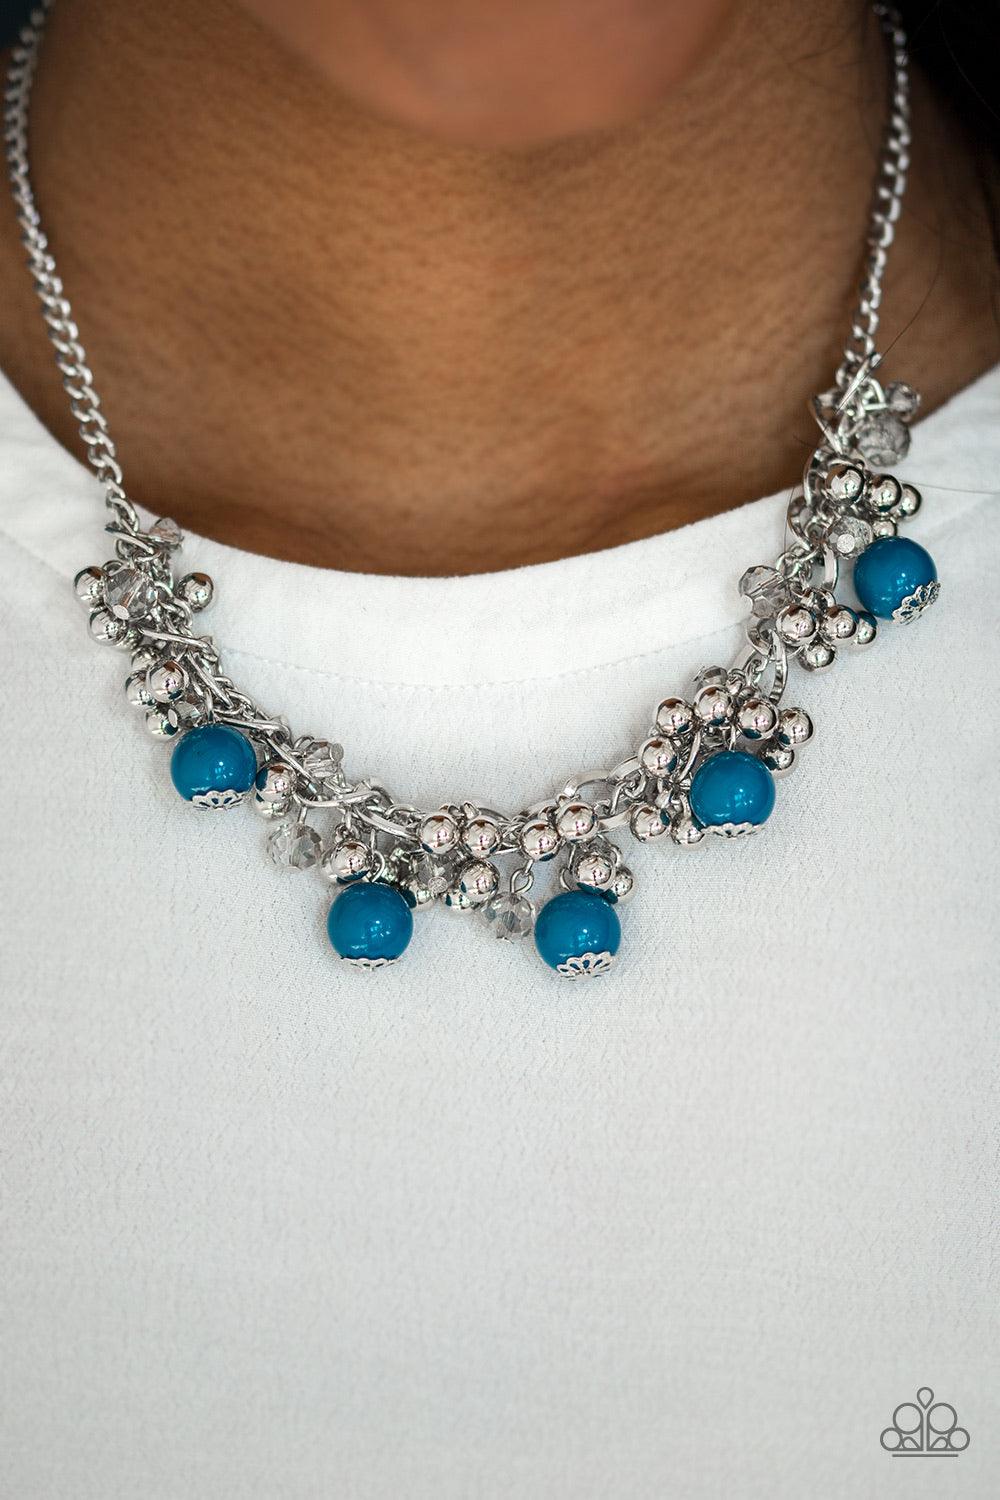 Paparazzi Accessories A Pop of Posh - Blue Crystal like beads and classic silver beads dangle from a bold silver chain, creating a clustered fringe below the collar. Polished blue beads trickle between the clustered beading, adding a casual pop of color t